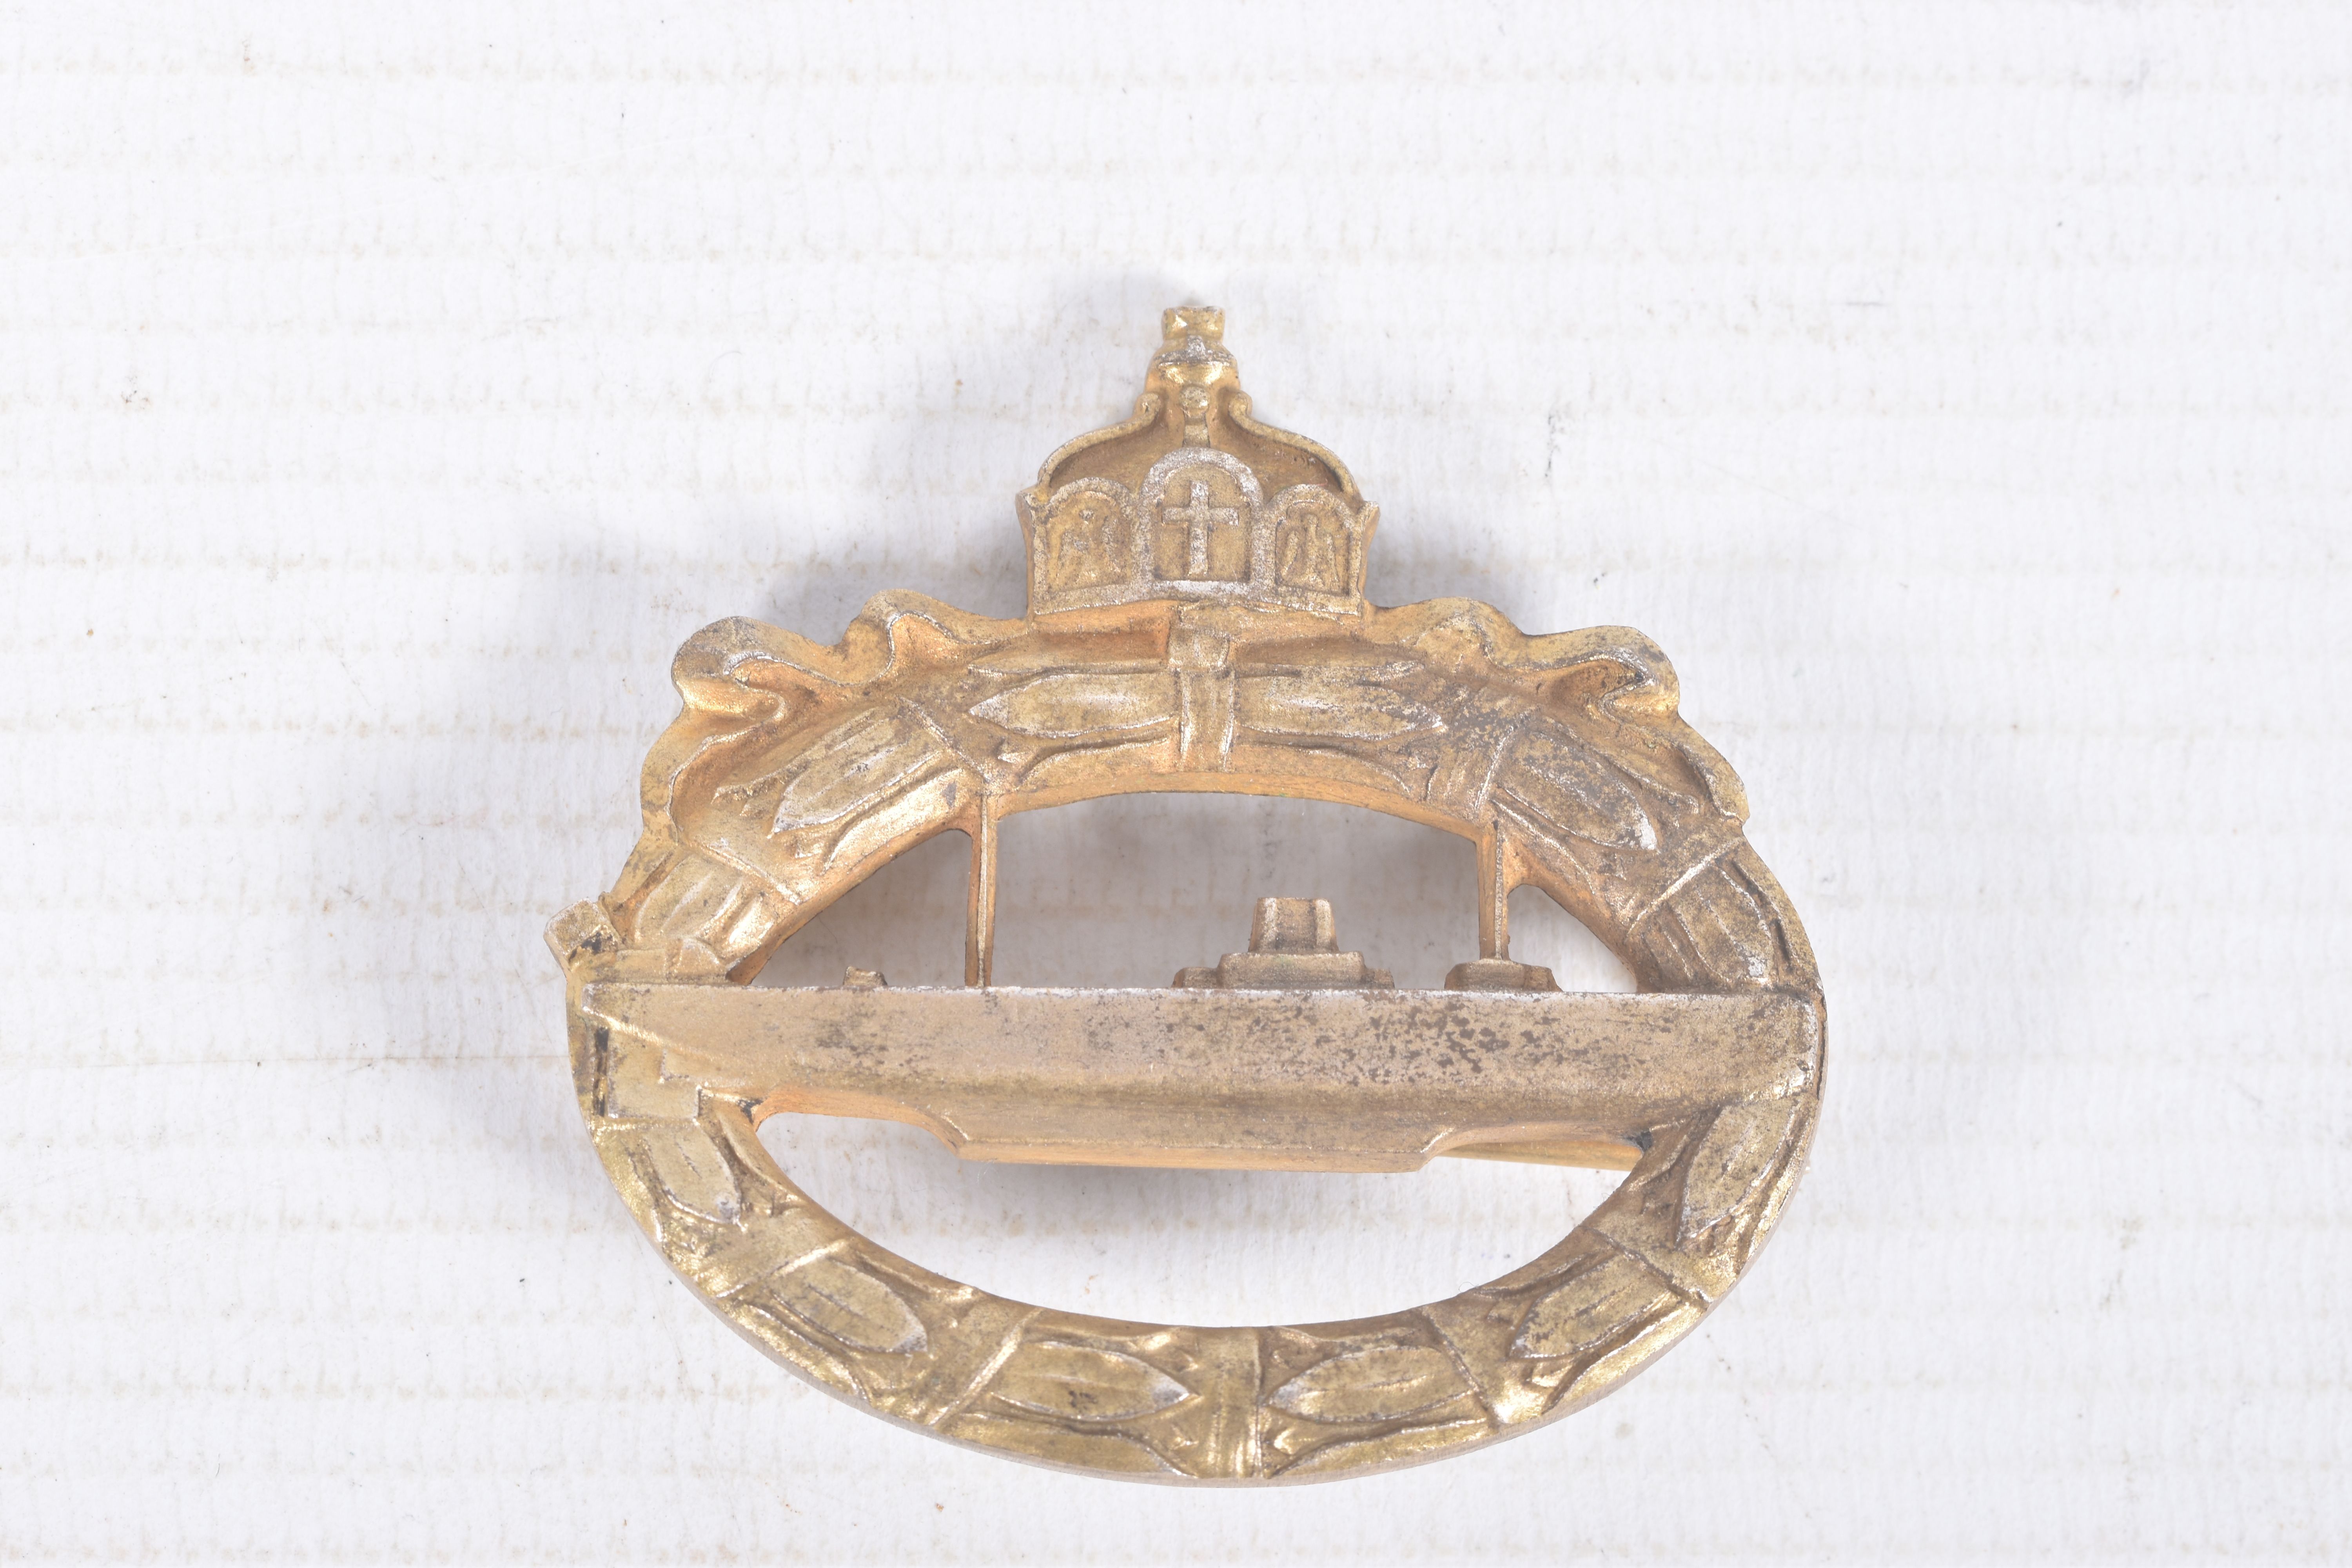 A WWI ERA IMPERIAL GERMANY U-BOAT BADGE, this is bronze in colour and has a pin fastener, it has